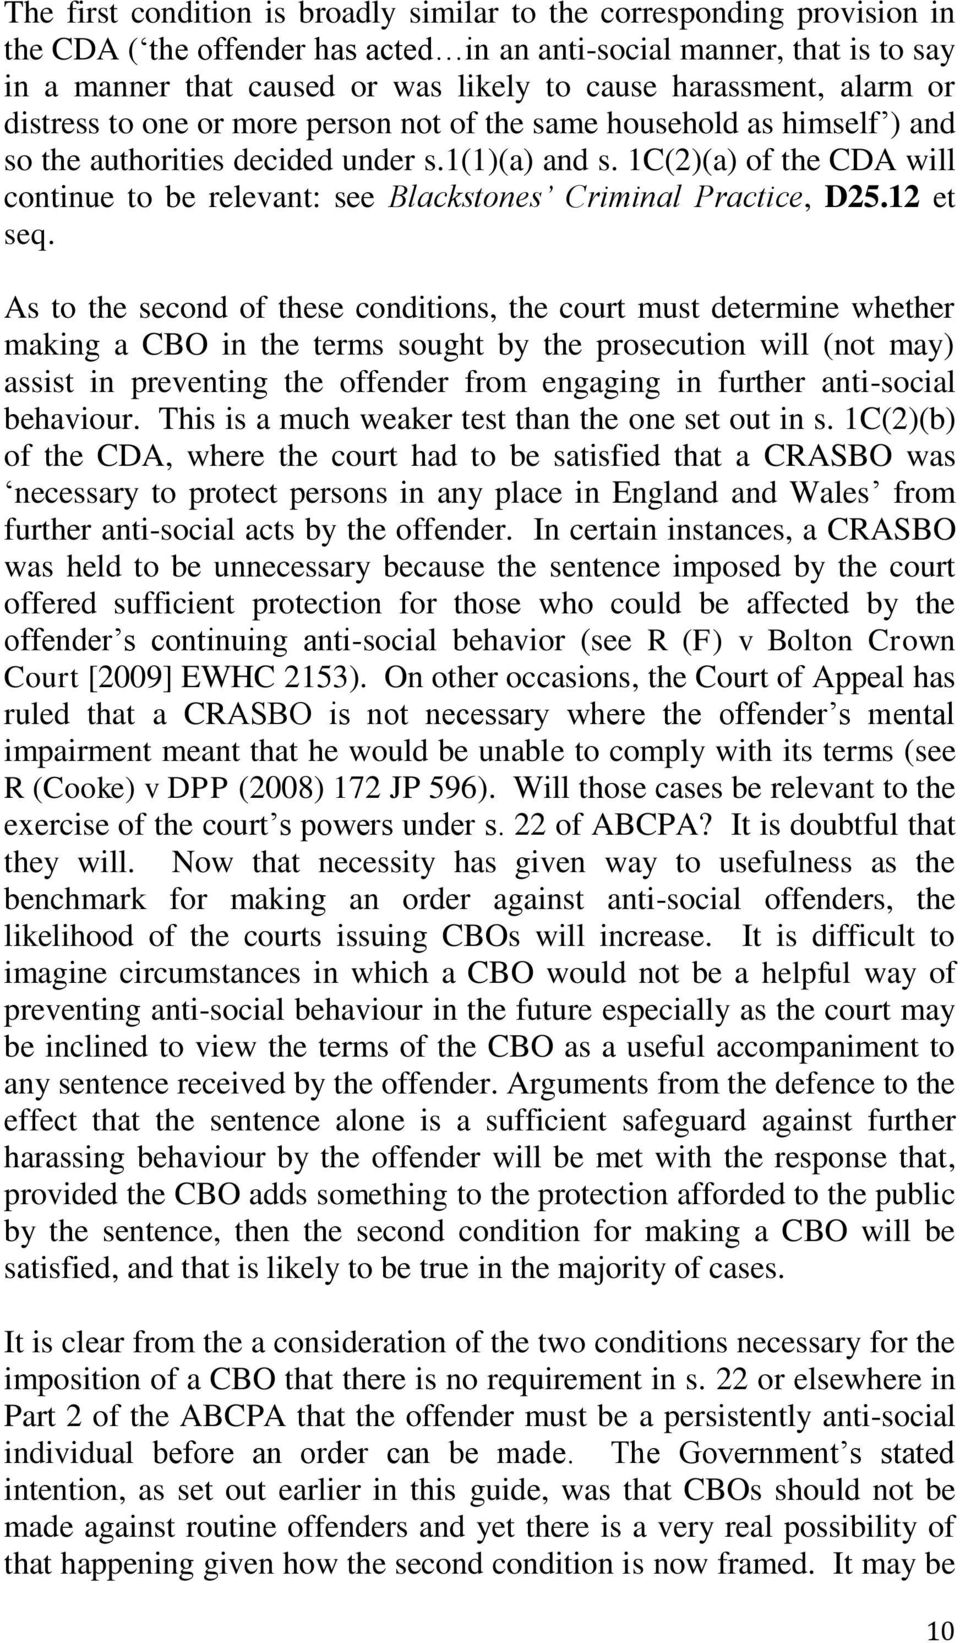 1C(2)(a) of the CDA will continue to be relevant: see Blackstones Criminal Practice, D25.12 et seq.